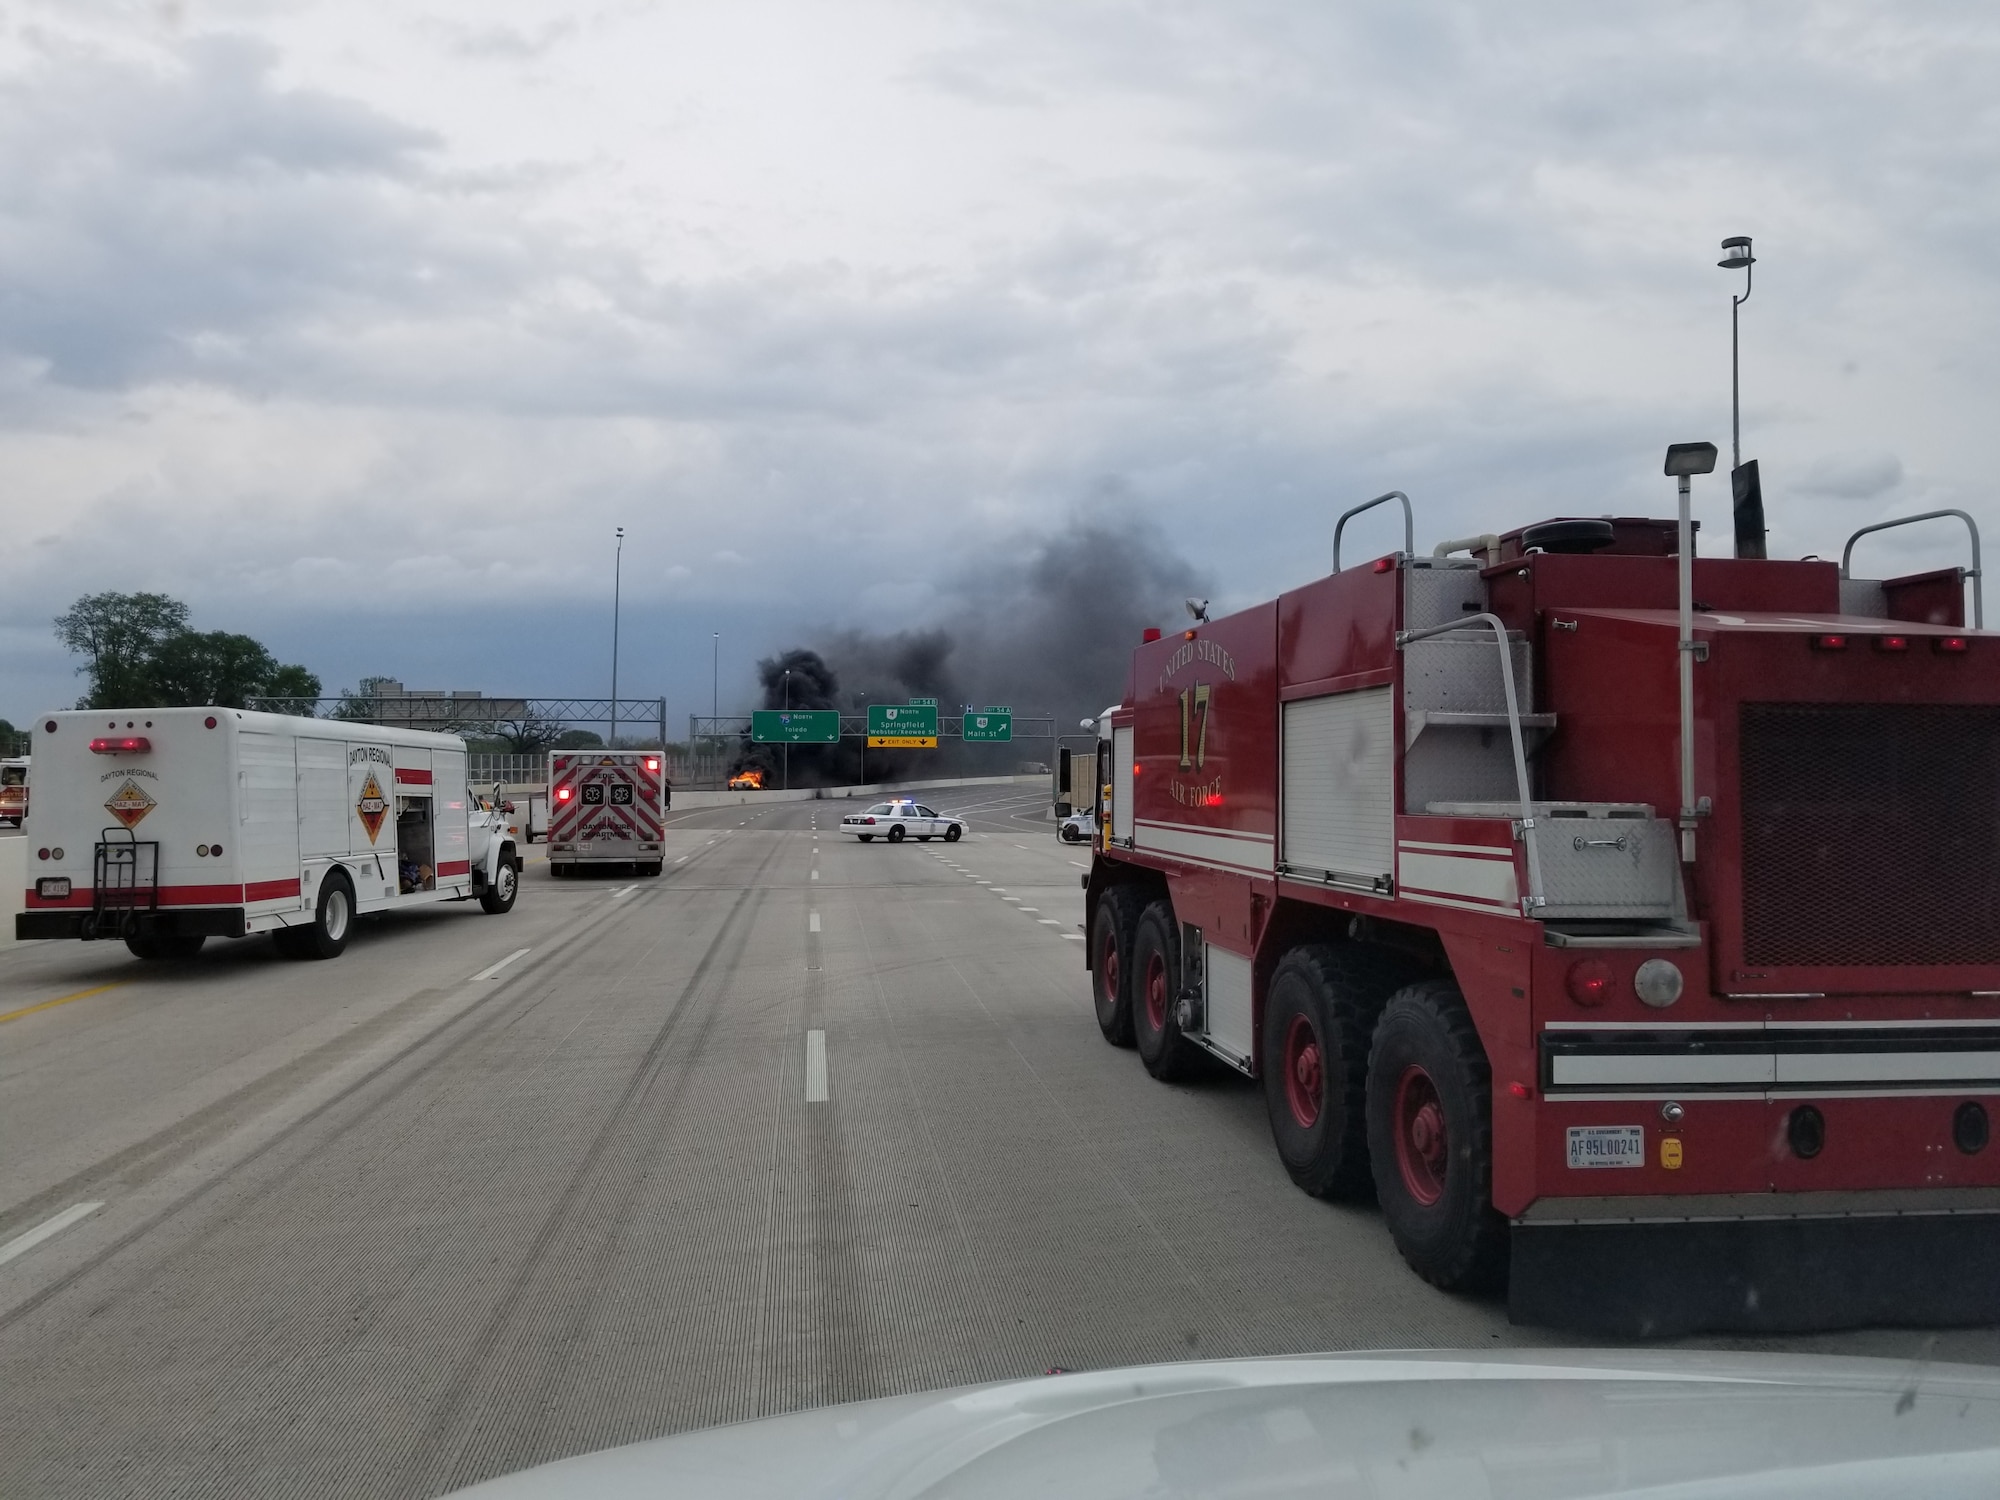 “Crash 17,” one of Wright-Patterson’s Aircraft Rescue and Fire Fighting trucks, arrives on site to assist Dayton first responders as they battle a major fuel fire on I-75 April 30, 2017 in Dayton, Ohio. The ARFF, specifically designed to combat aircraft fires, was called in to help due its unique capabilities in fighting fires of this type. (U.S. Air Force photo/Keith Hawkins)  